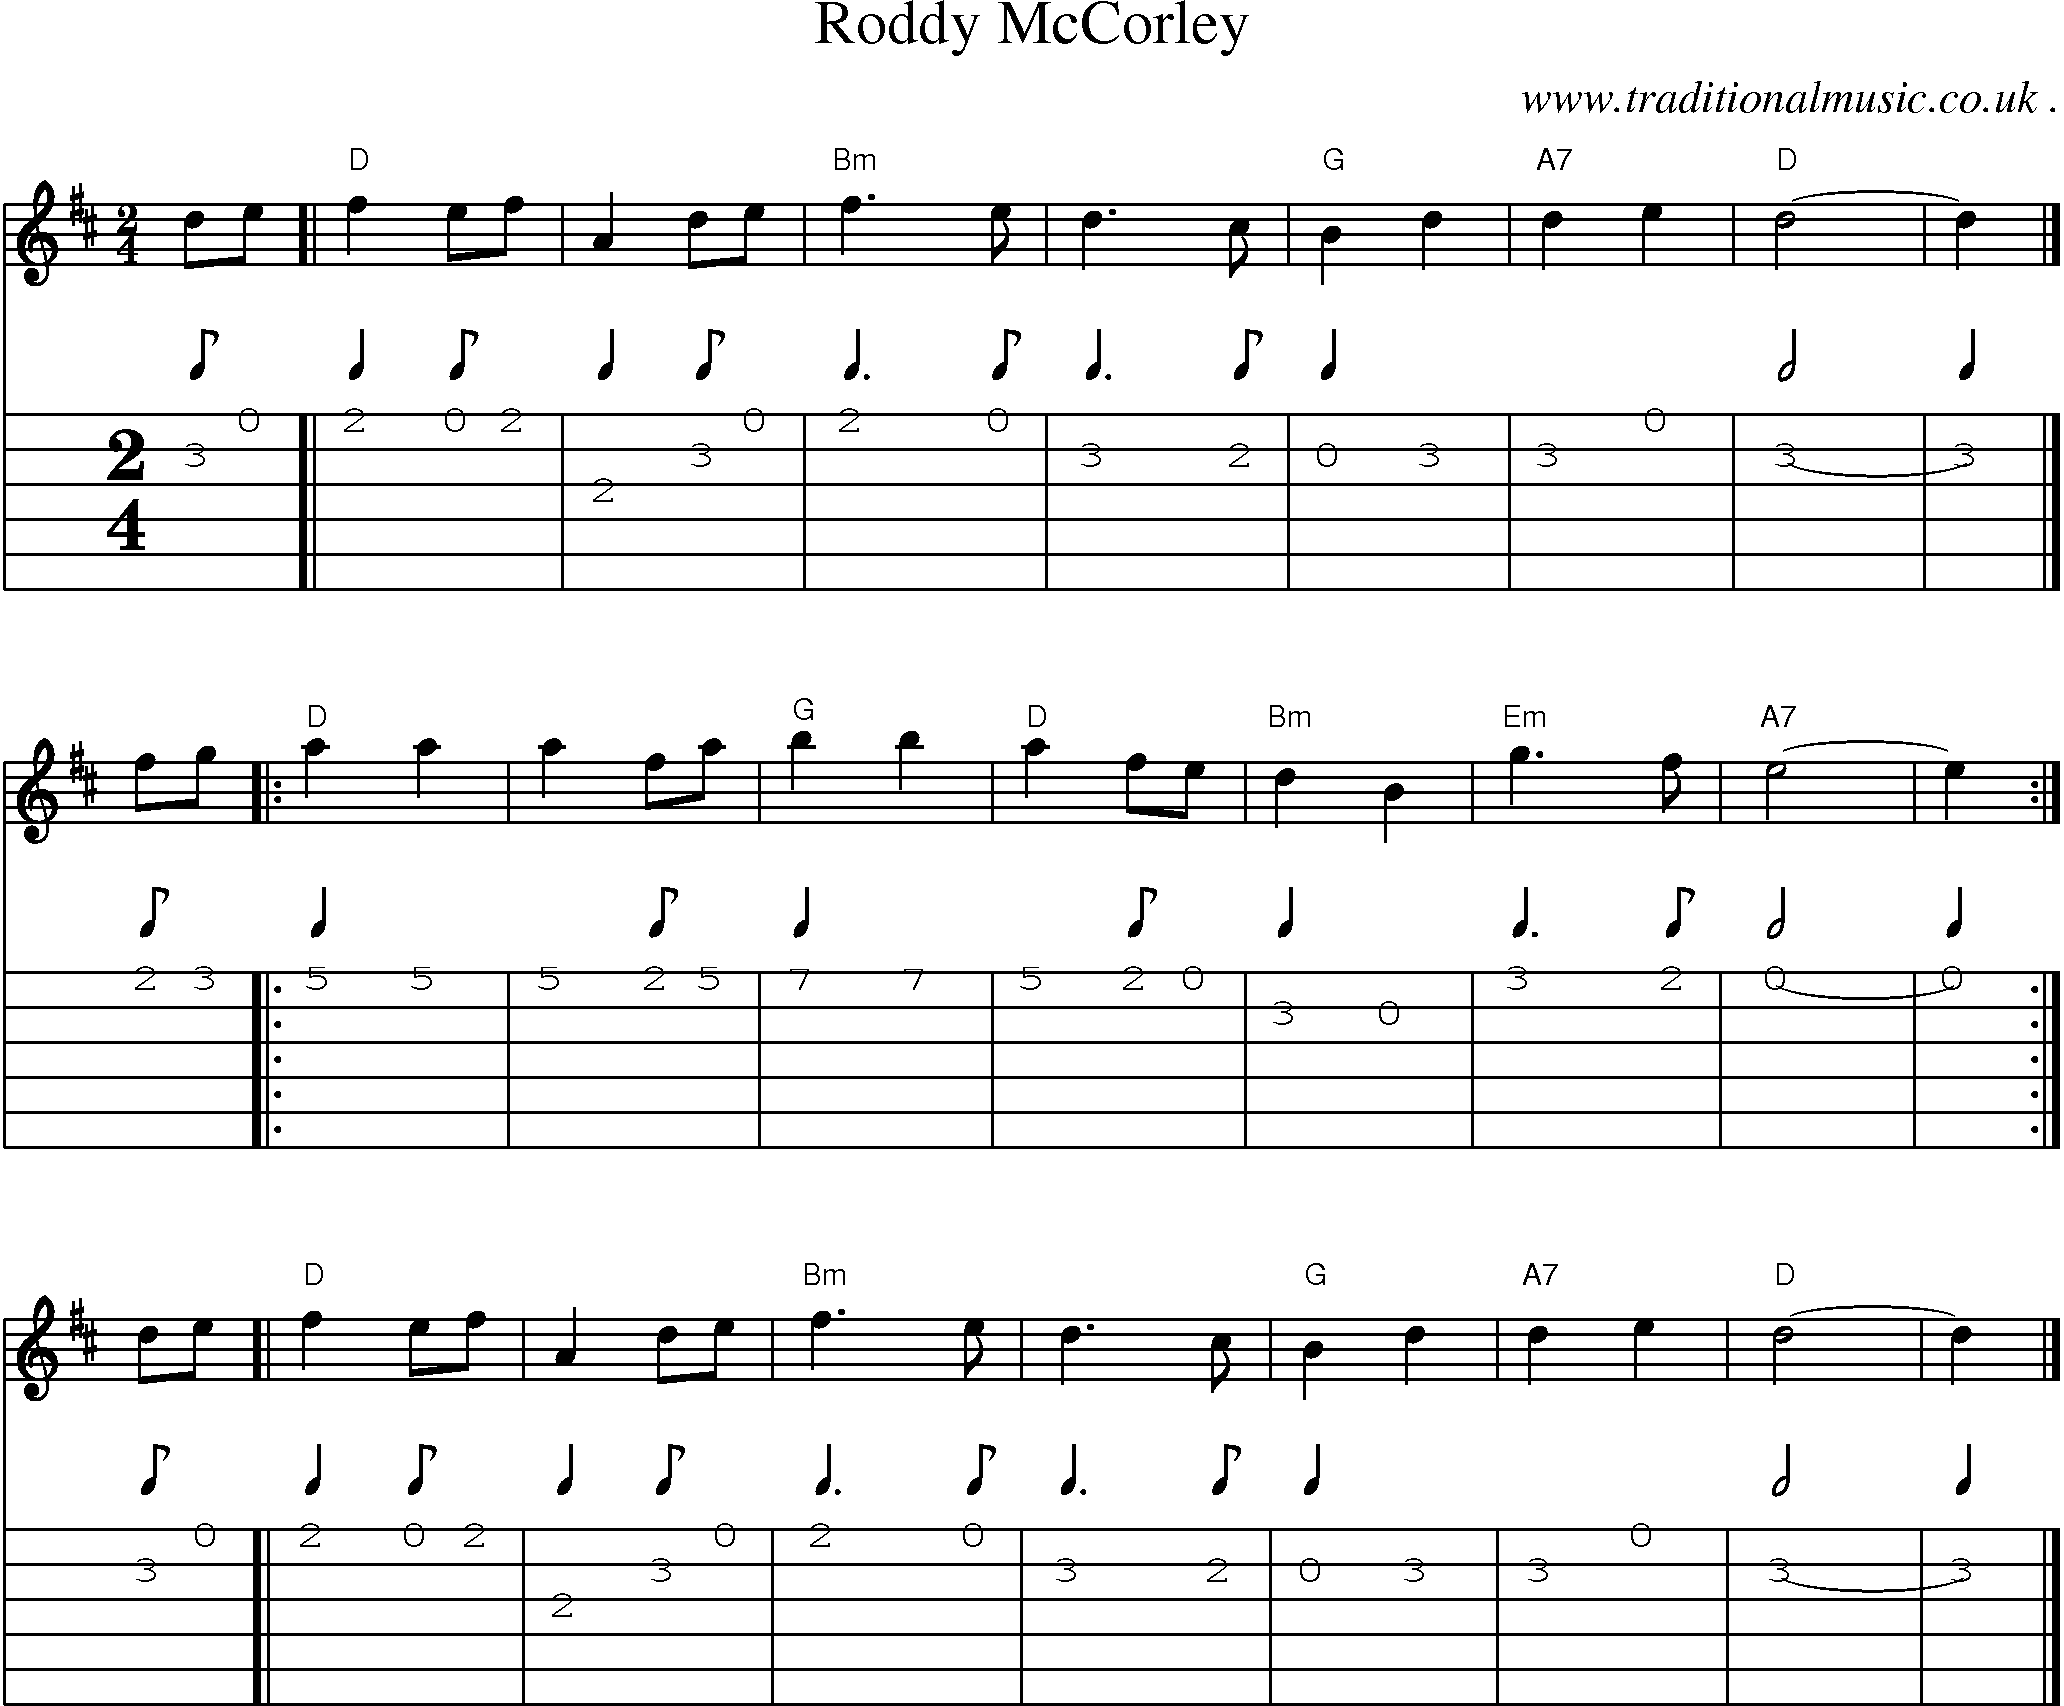 Sheet-music  score, Chords and Guitar Tabs for Roddy Mccorley